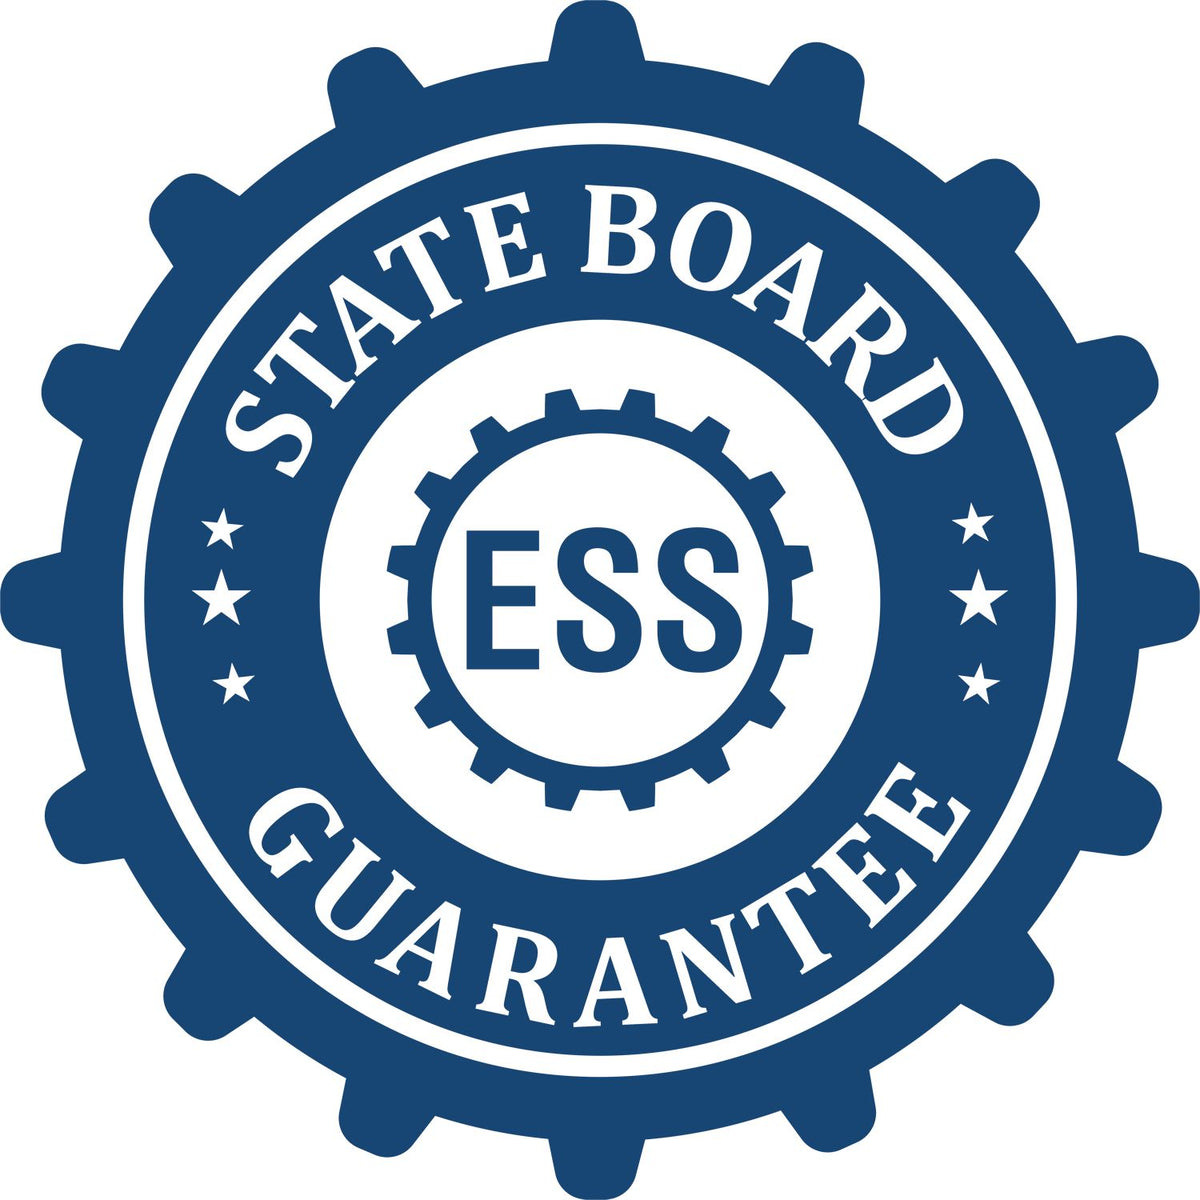 An emblem in a gear shape illustrating a state board guarantee for the State of Georgia Extended Long Reach Geologist Seal